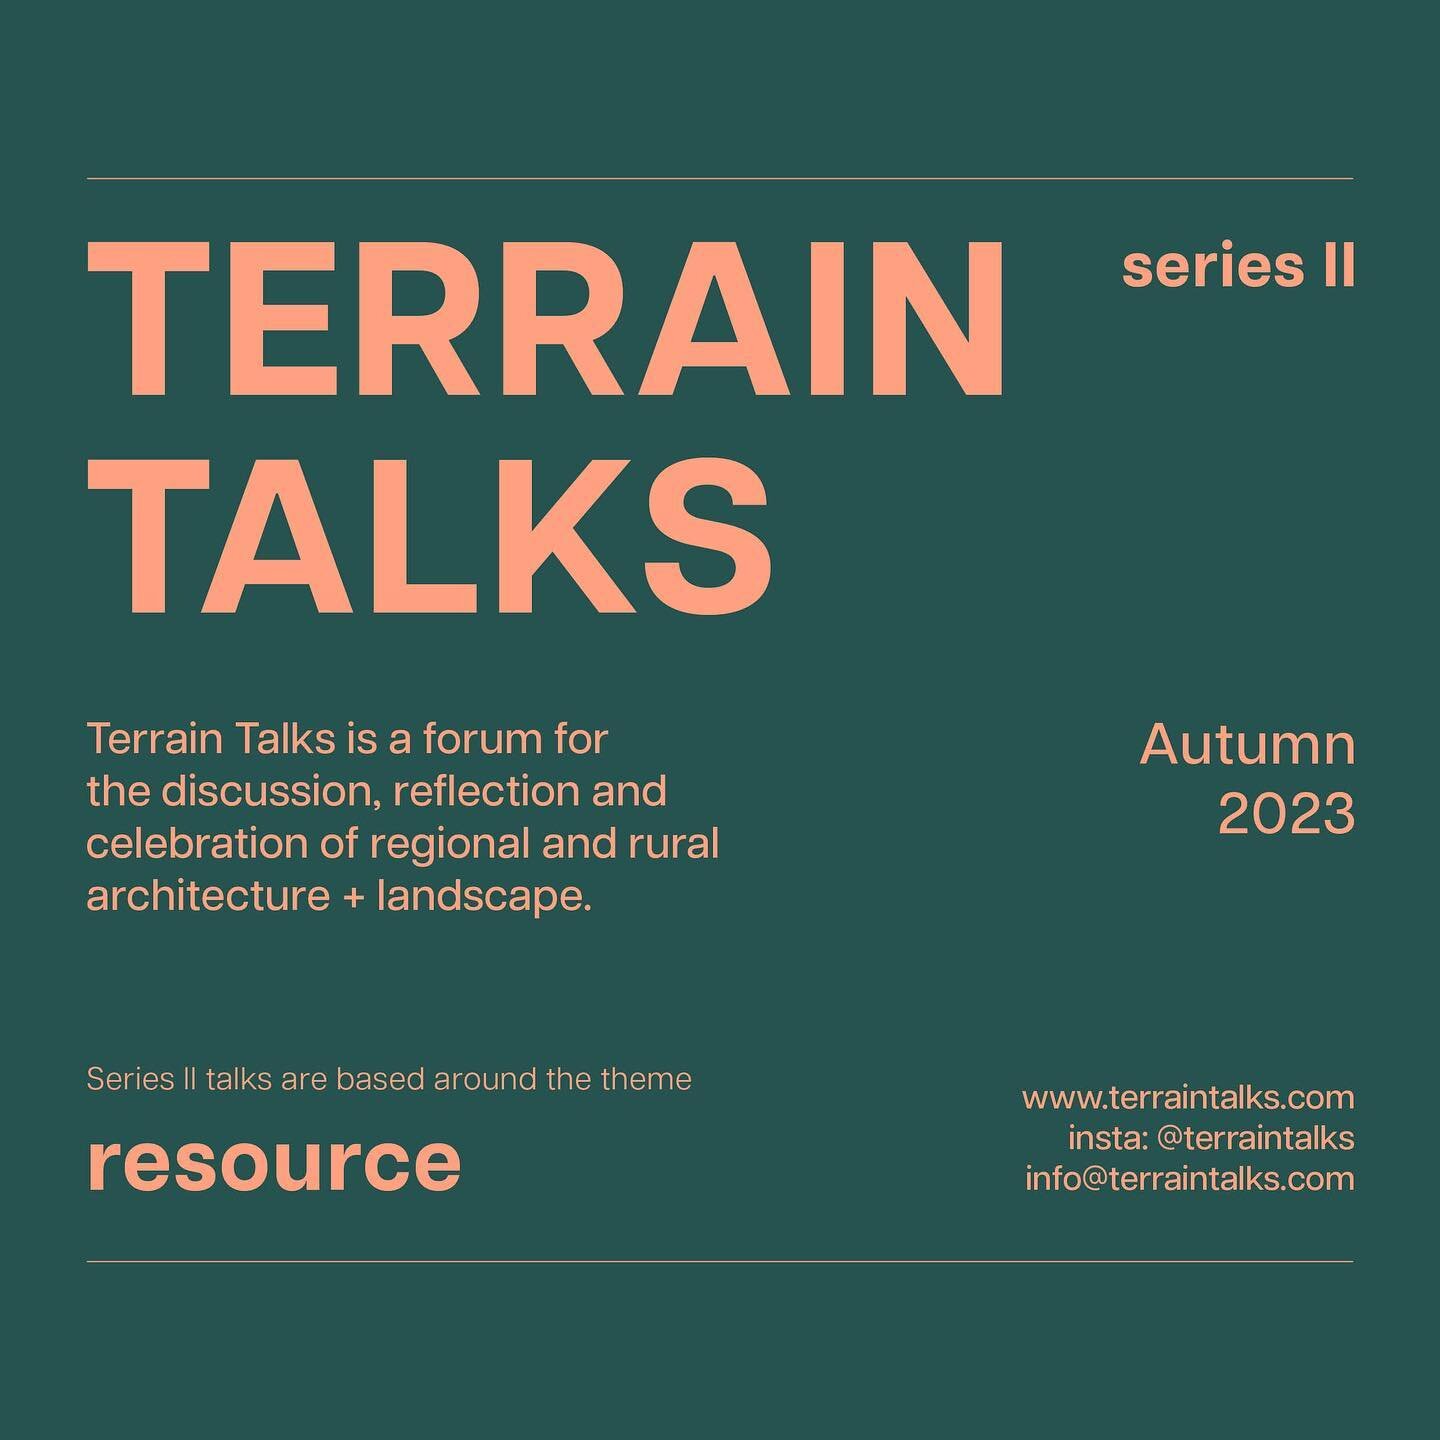 Series II of TERRAIN Talks are based around the theme of Resource. 

- 

By collaborating with invited practitioners, professionals and academics, delivered through a series of public seminars and events, we hope to cultivate discussion and explorati